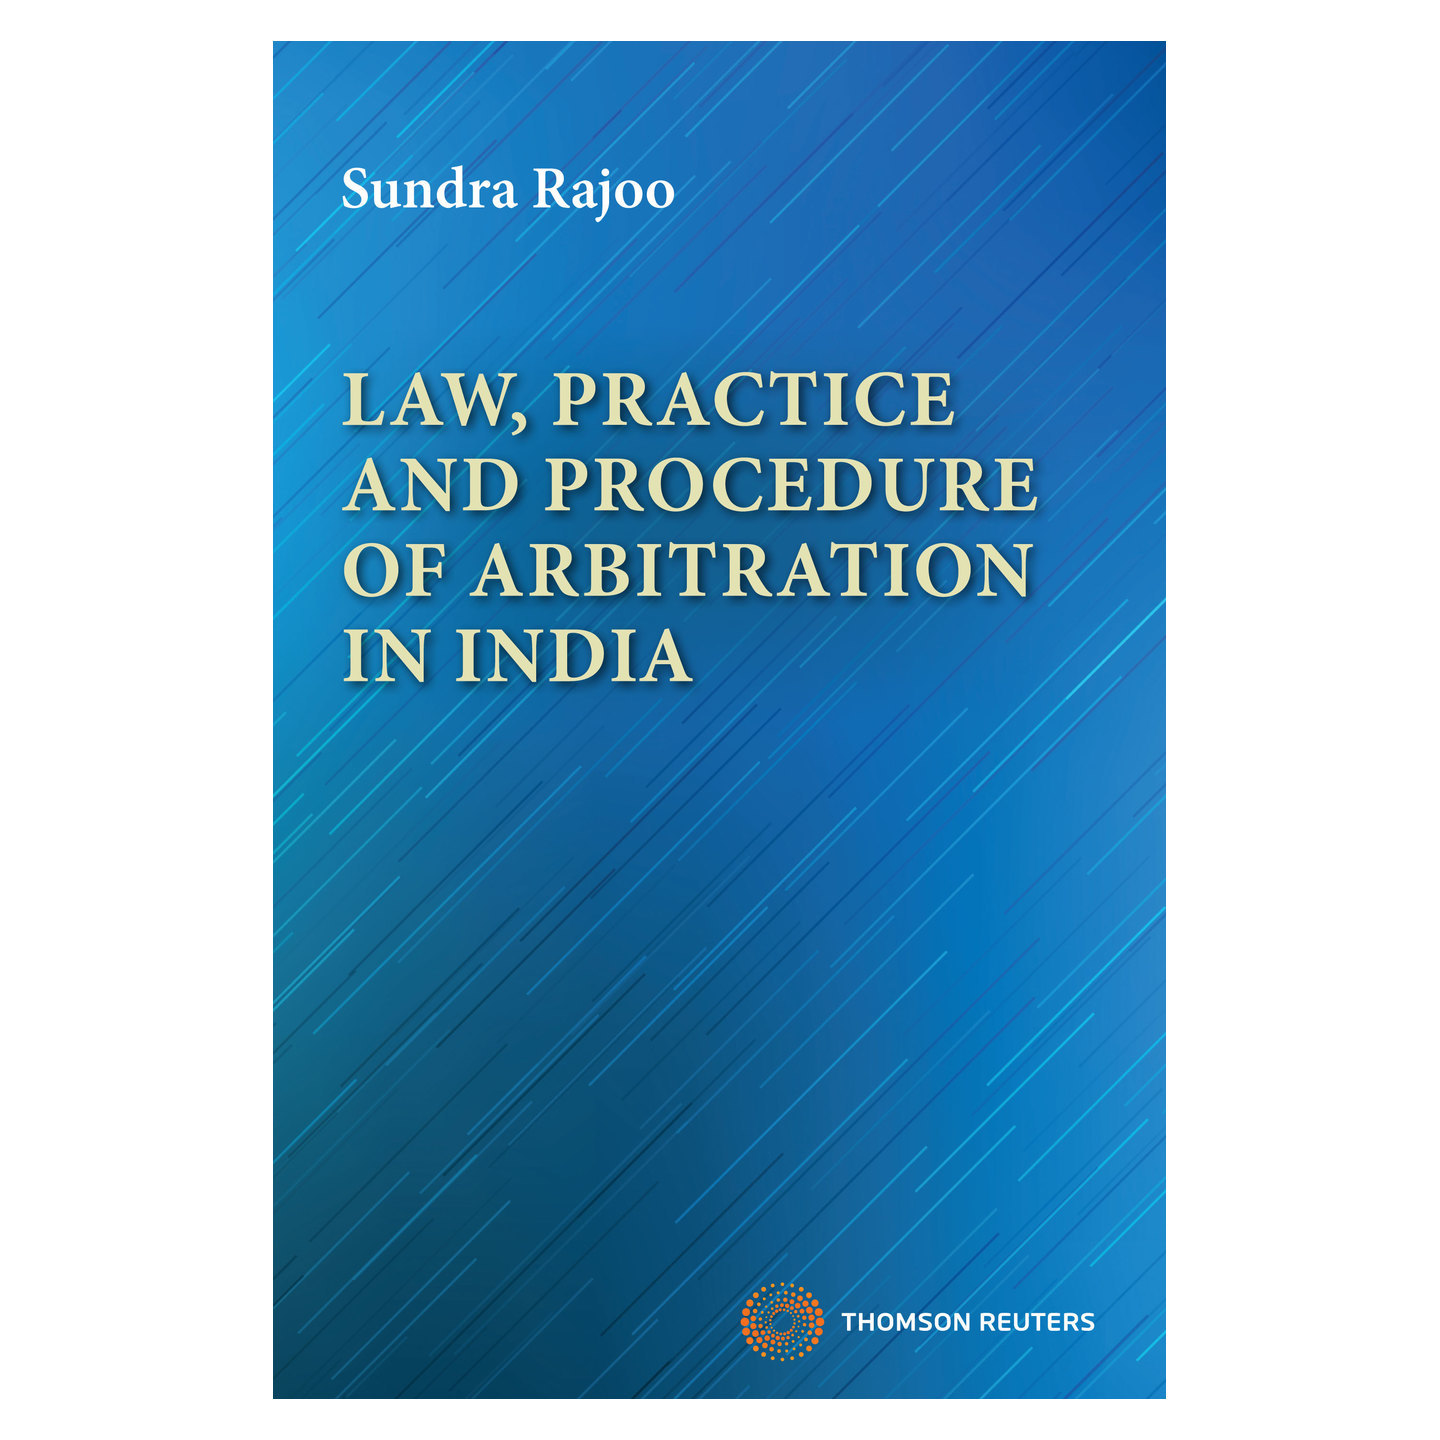 Law, Practice and Procedure of Arbitration in India